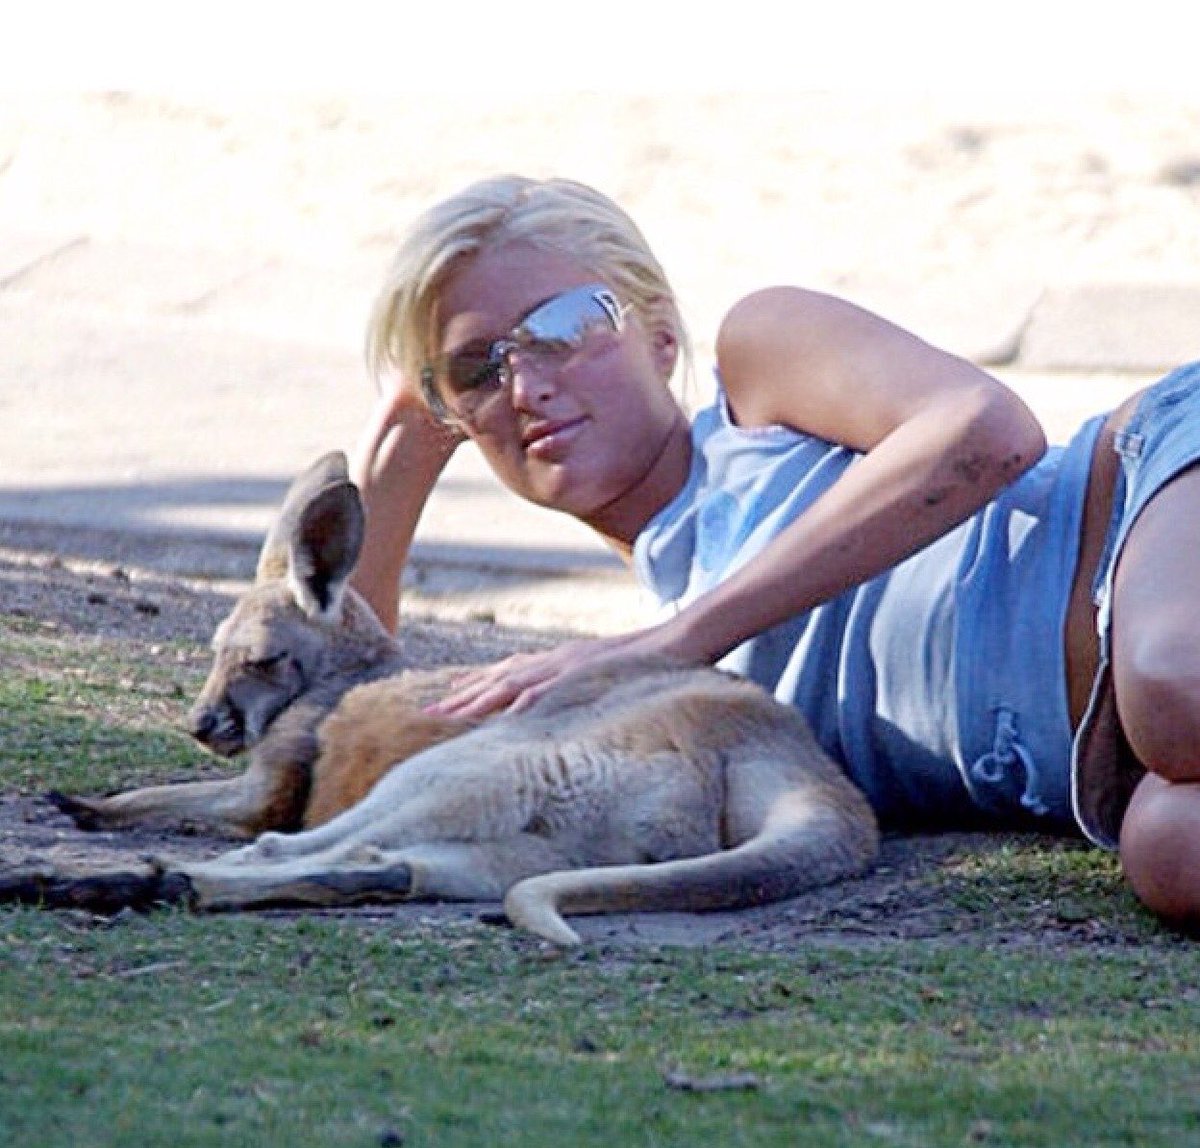 Chilling with a Baby Kangaroo! #TBT https://t.co/vAM3auW0E1